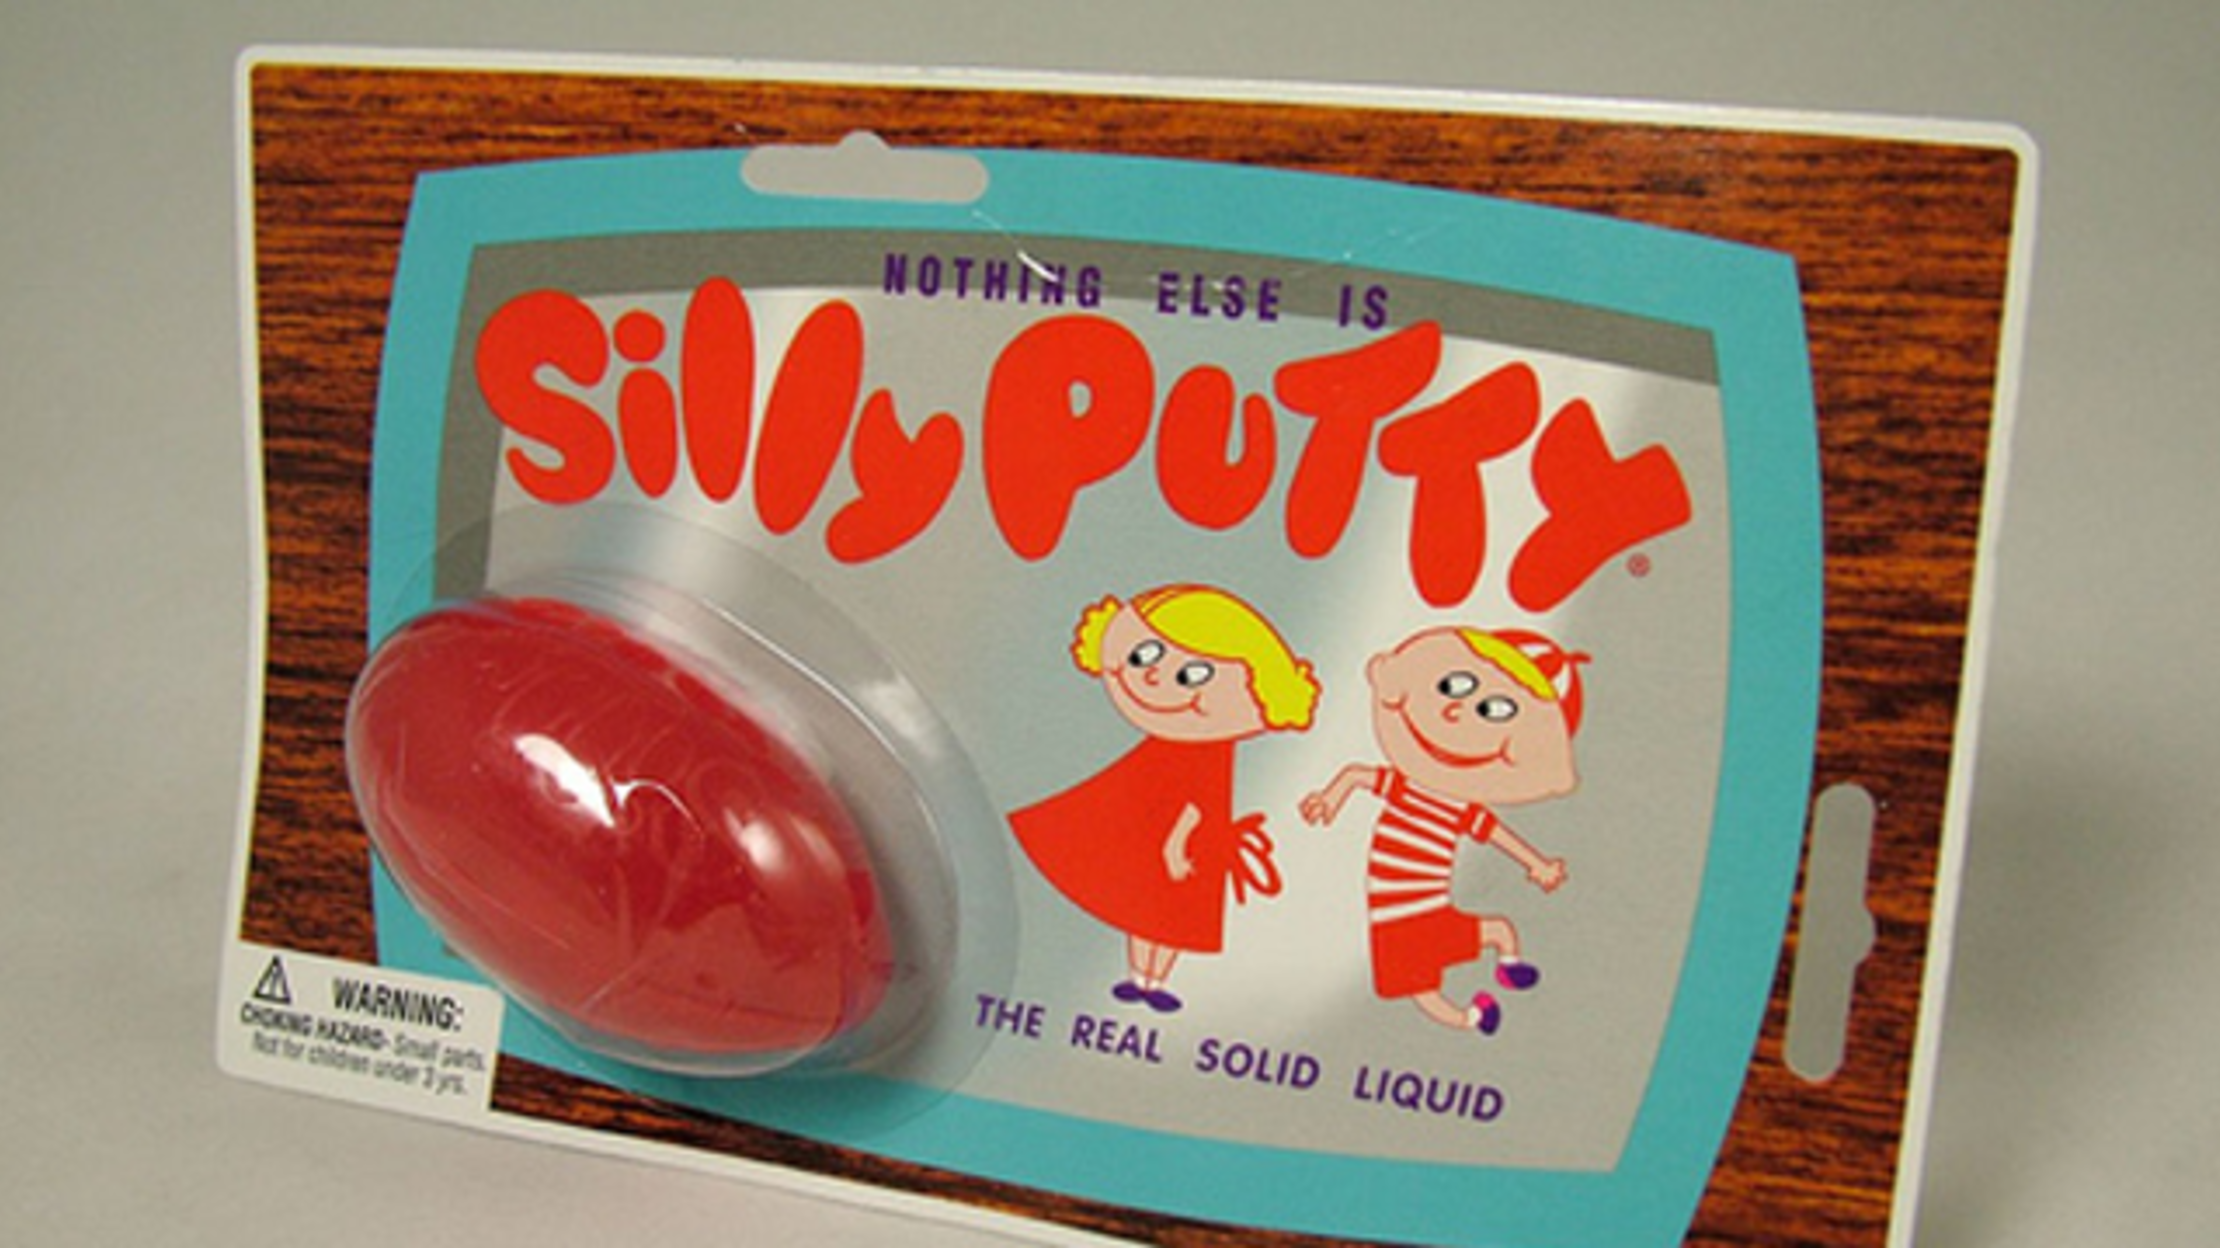 red silly putty